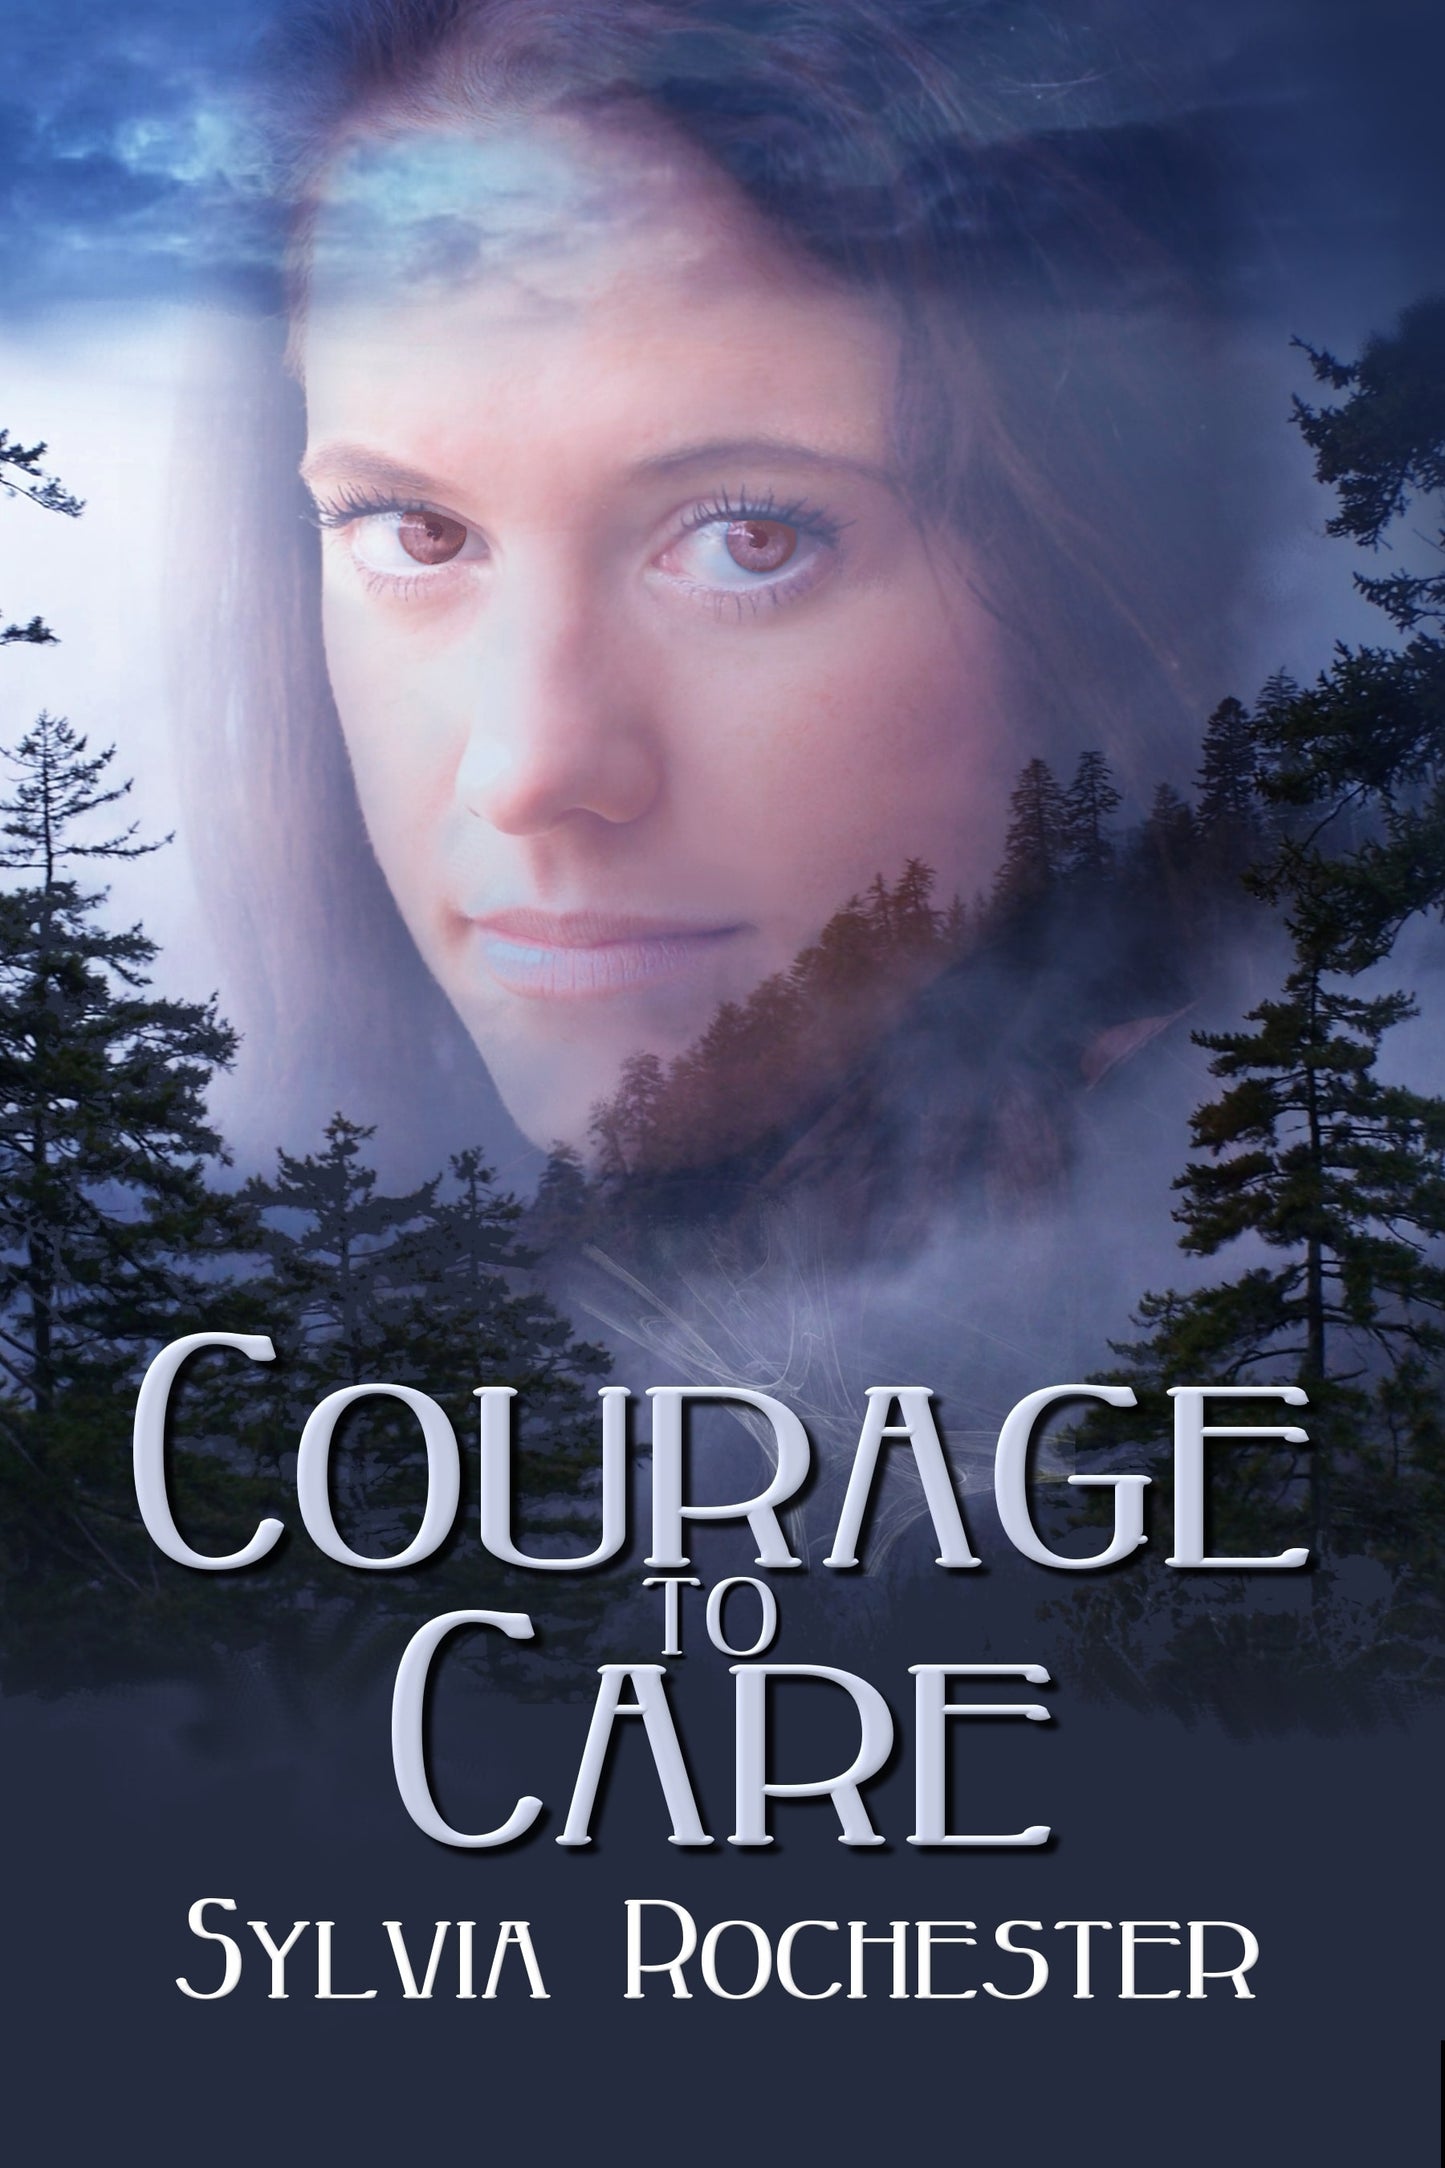 Courage To Care